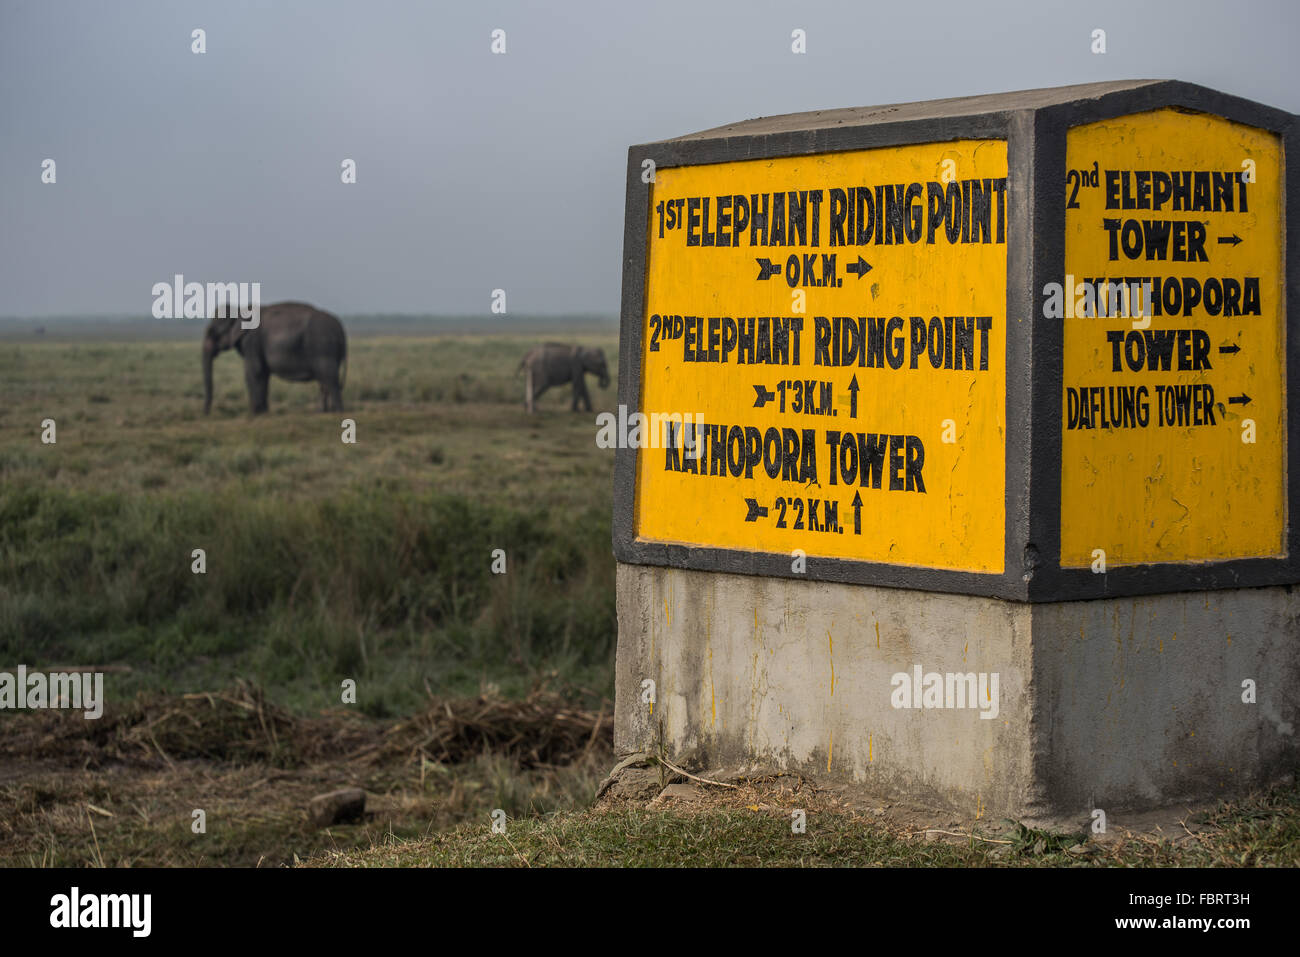 Two elephants in the distance and bright yellow Elephant Riding Point sign in the foreground. Kaziranga National Park, India Stock Photo